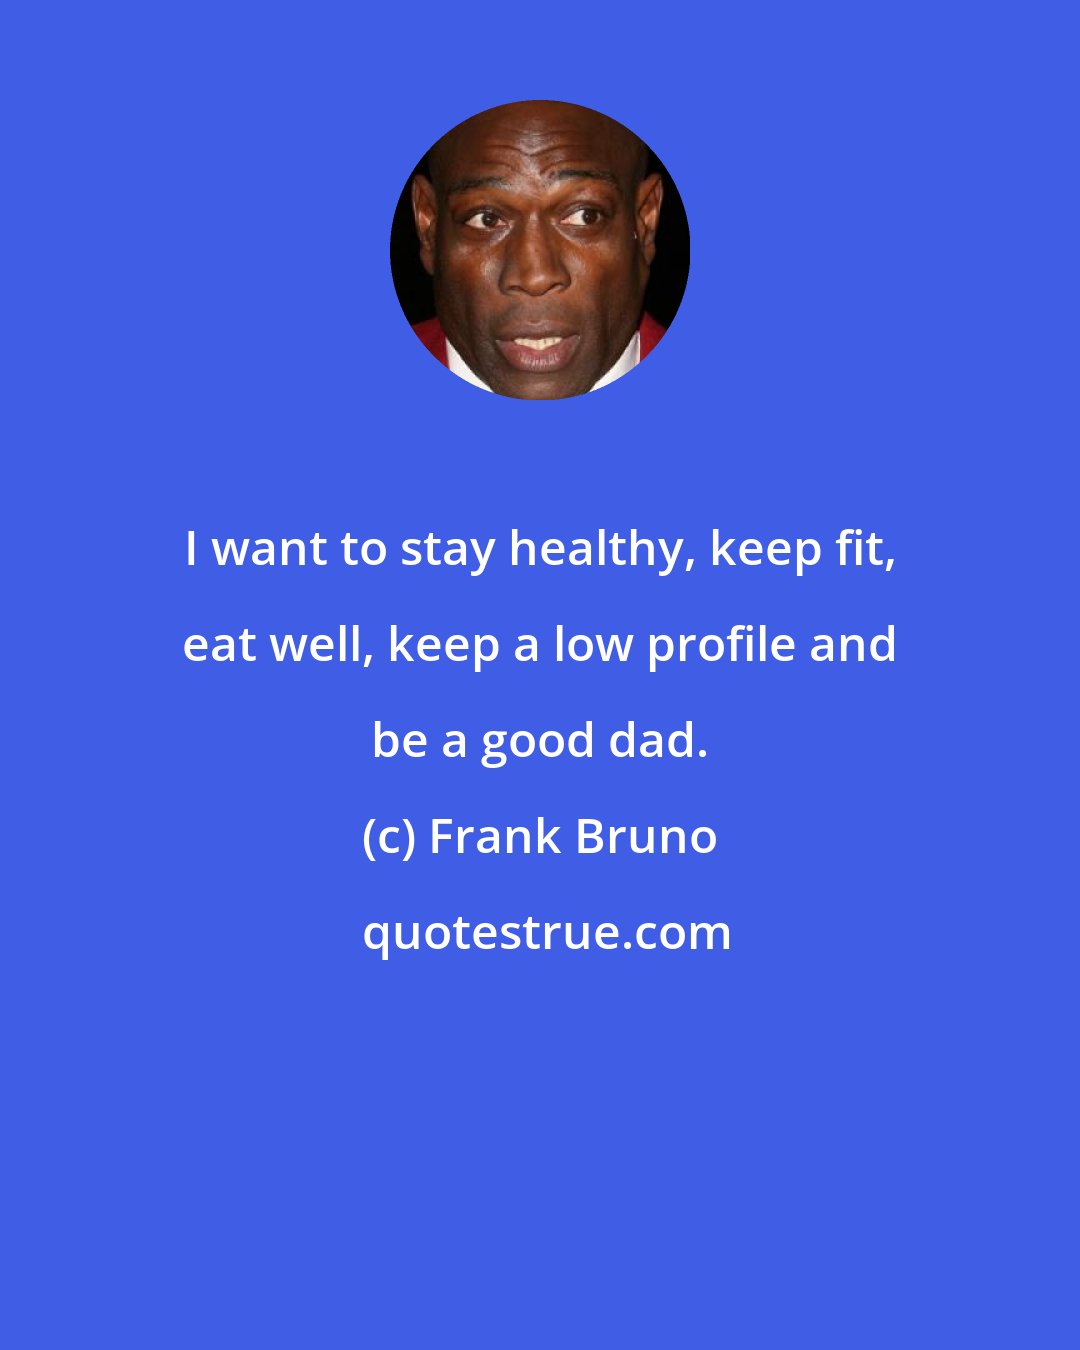 Frank Bruno: I want to stay healthy, keep fit, eat well, keep a low profile and be a good dad.